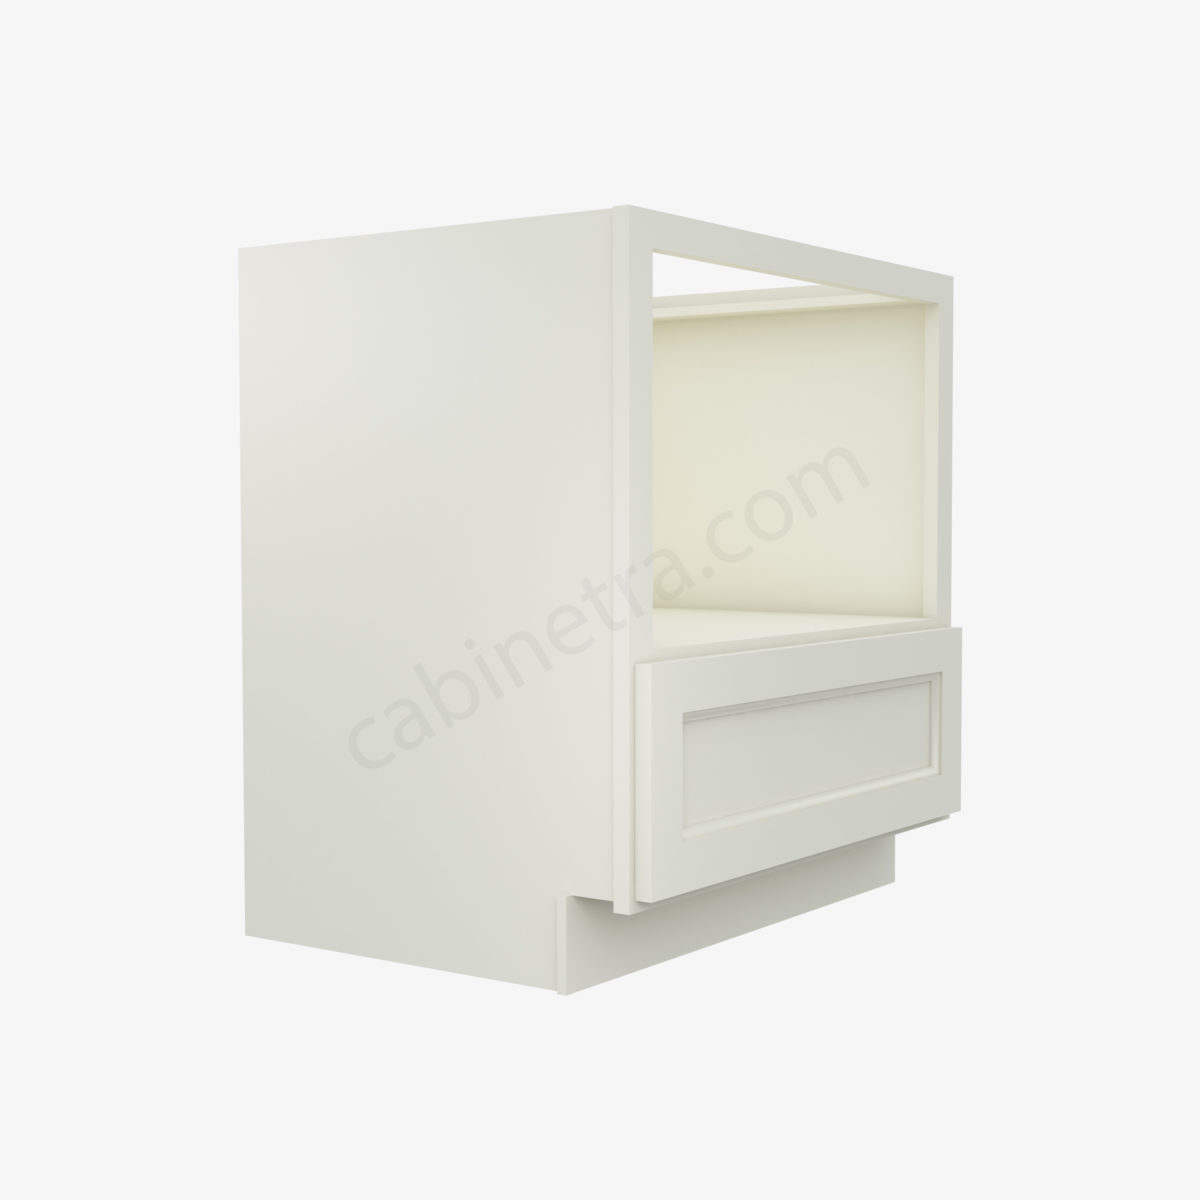 TQ B30MW 4 Forevermark Townplace Crema Cabinetra scaled